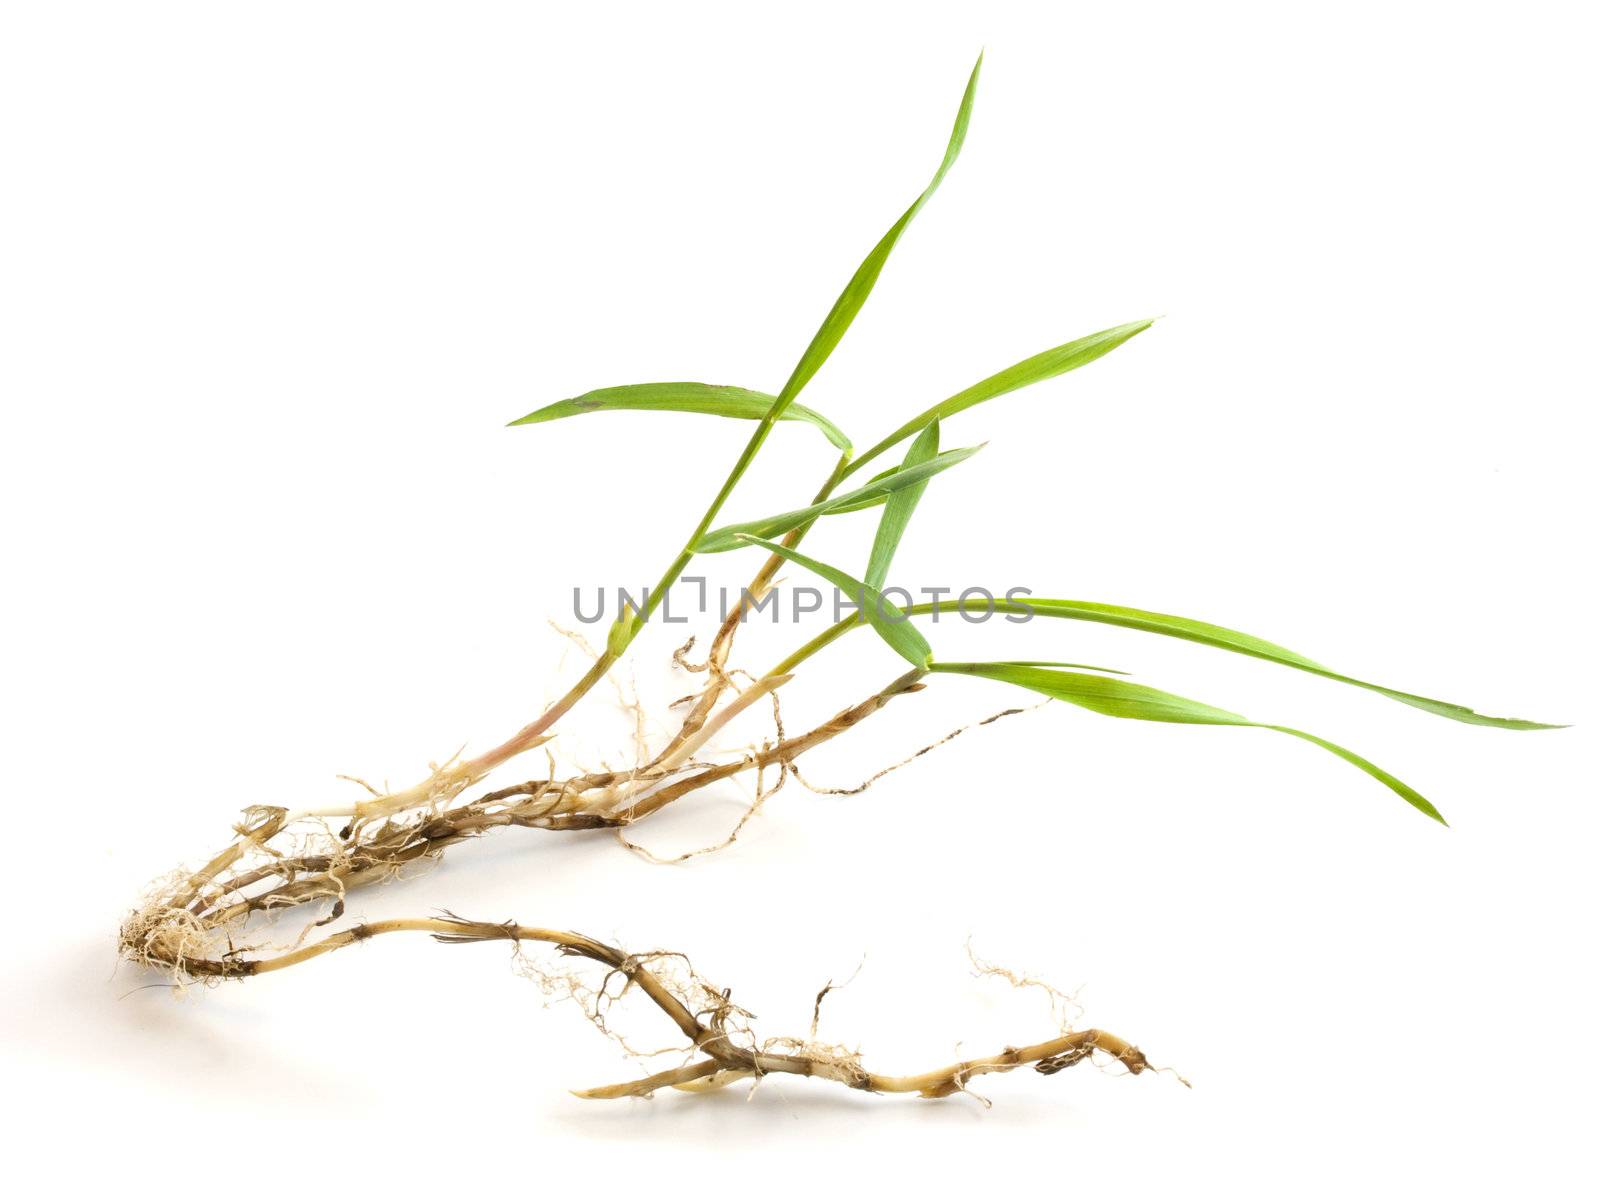 a nice specimen of crabgrass with roots and new leaves on white background